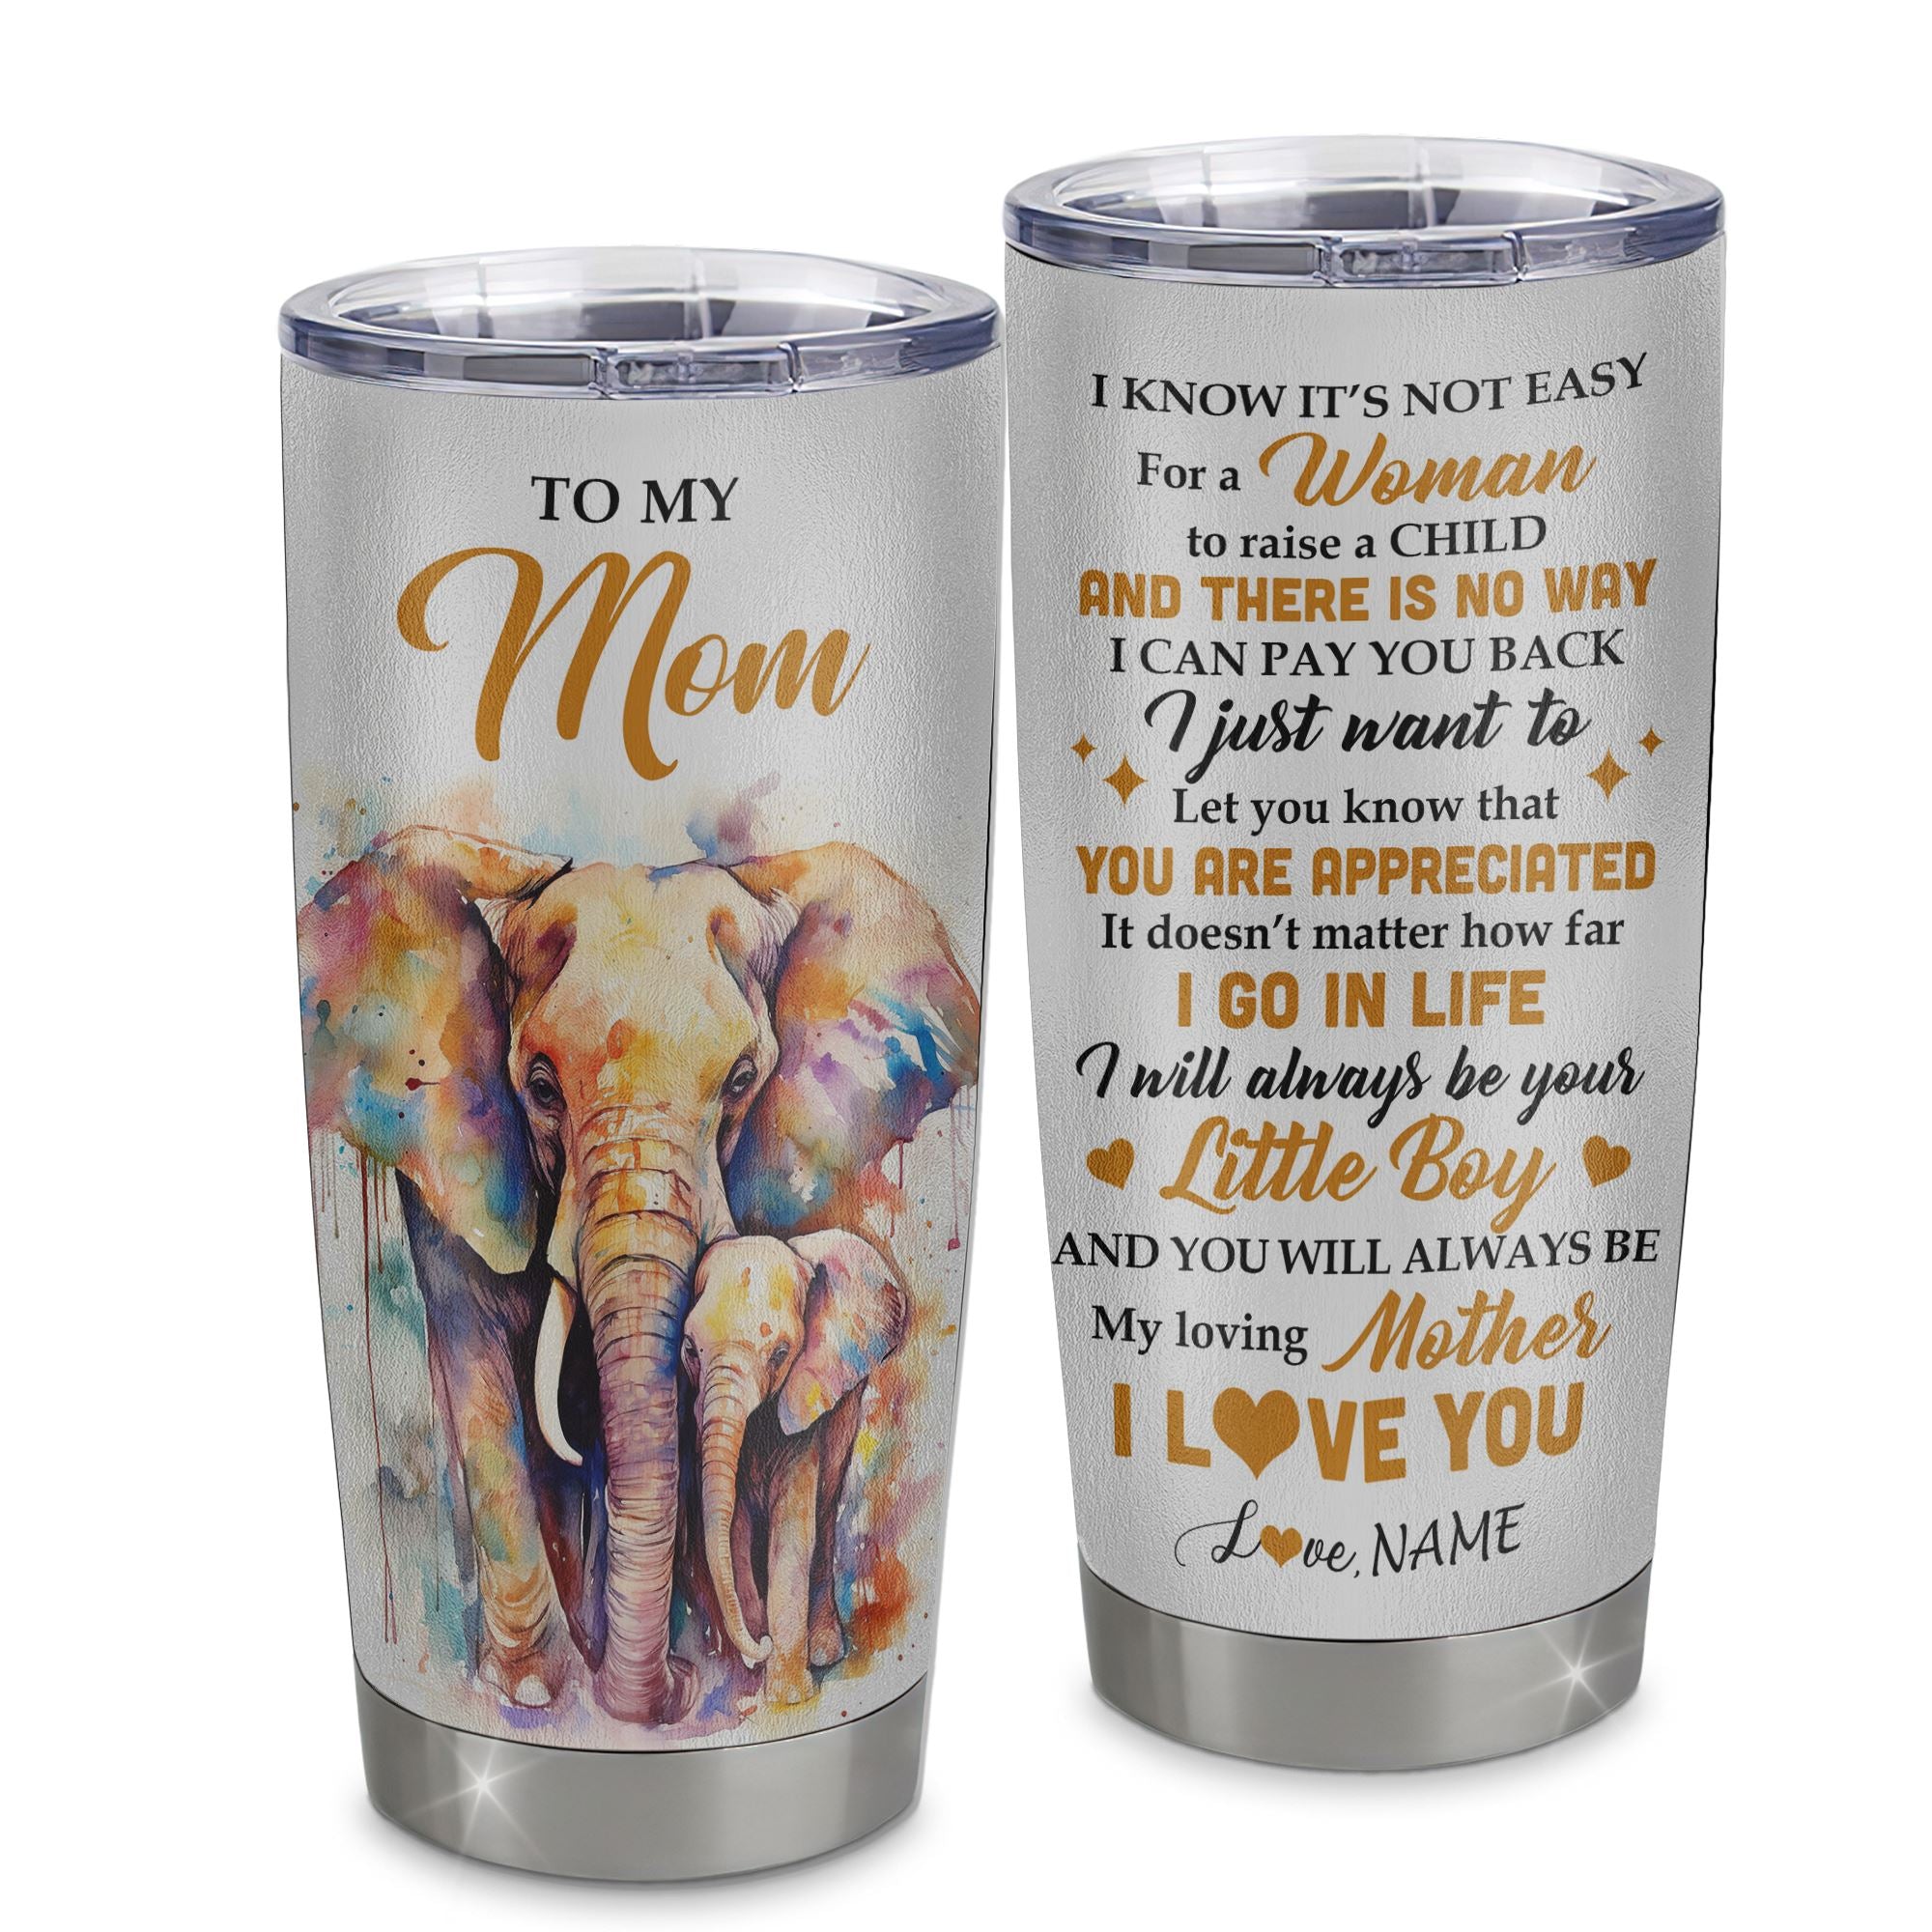 Personalized To My Mom Tumbler From Son Stainless Steel Cup Elephant A Woman To Raise A Child Mom Gift Birthday Mothers Day Thanksgiving Christmas Travel Mug